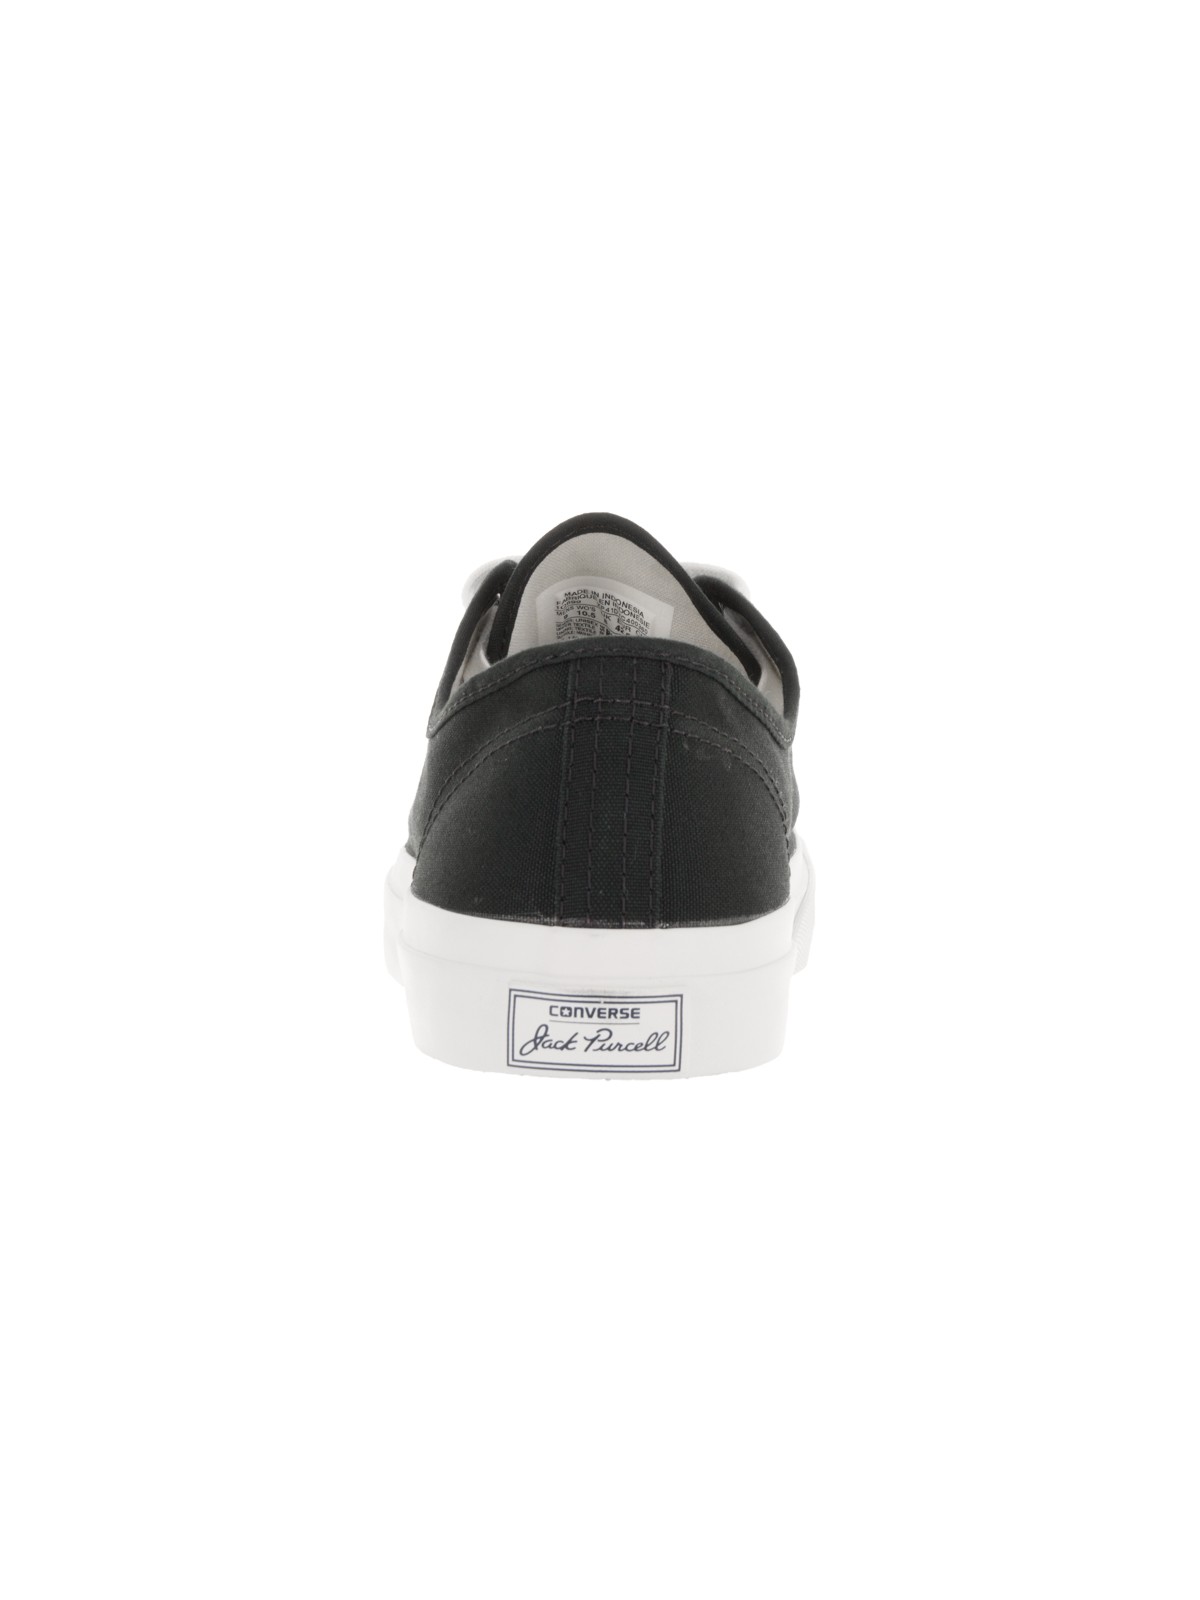 Converse Unisex Jack Purcell Cp Ox Casual Shoe - image 4 of 5